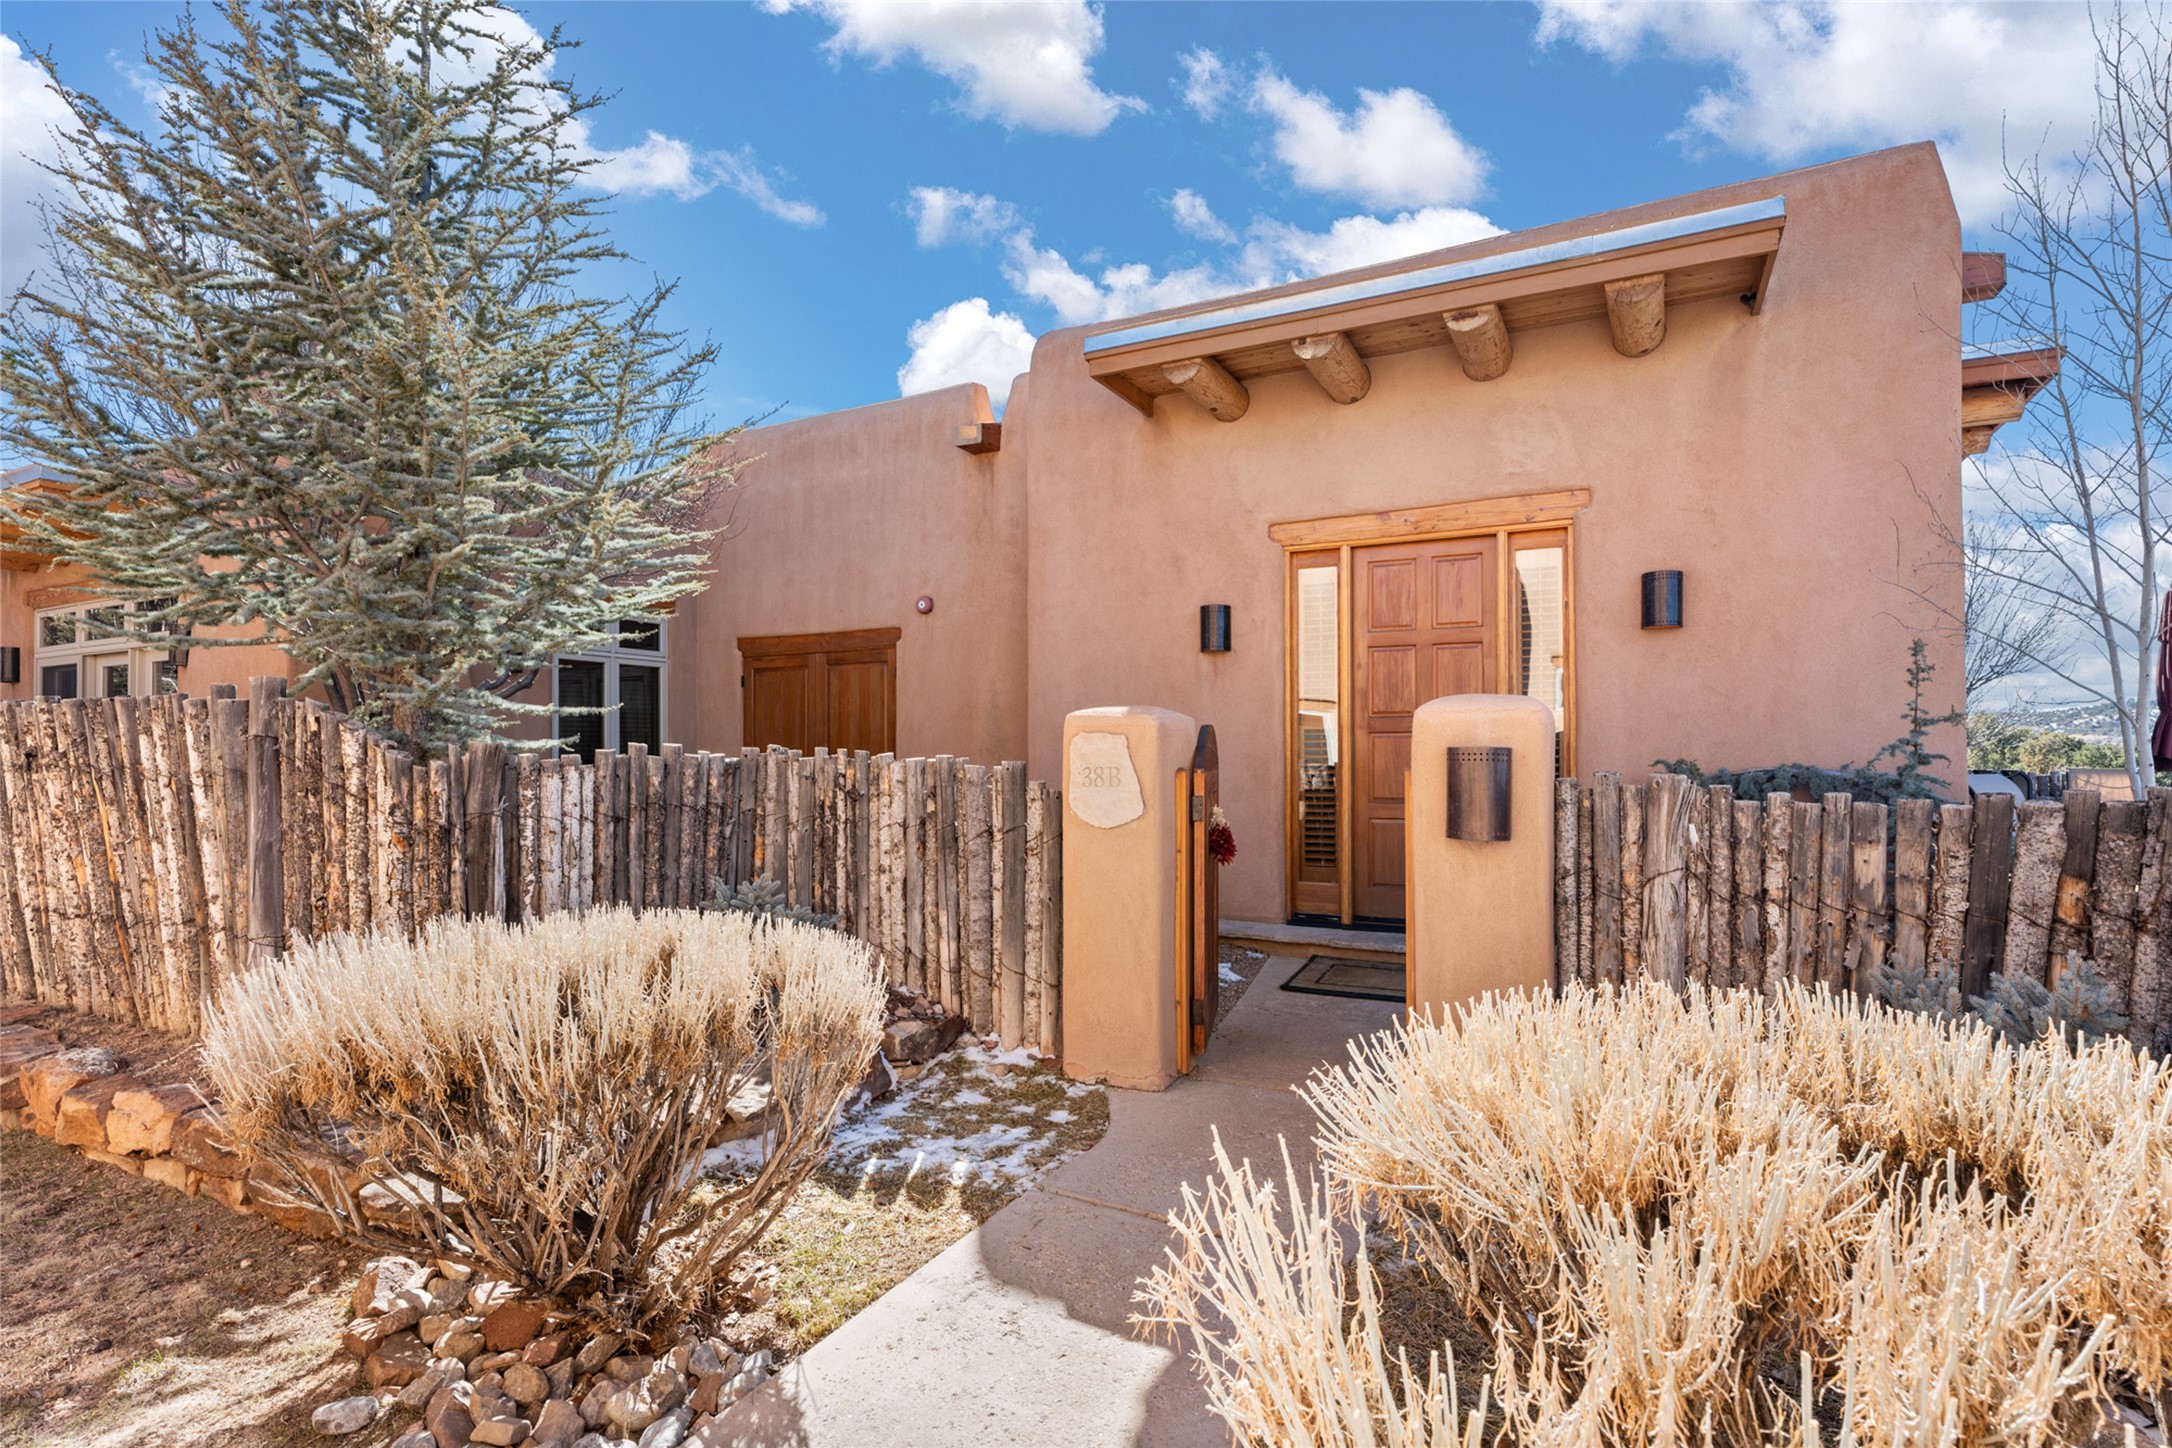 38 Lodge Trail B, Santa Fe, New Mexico 87506, 2 Bedrooms Bedrooms, ,2 BathroomsBathrooms,Residential,For Sale,38 Lodge Trail B,202400333